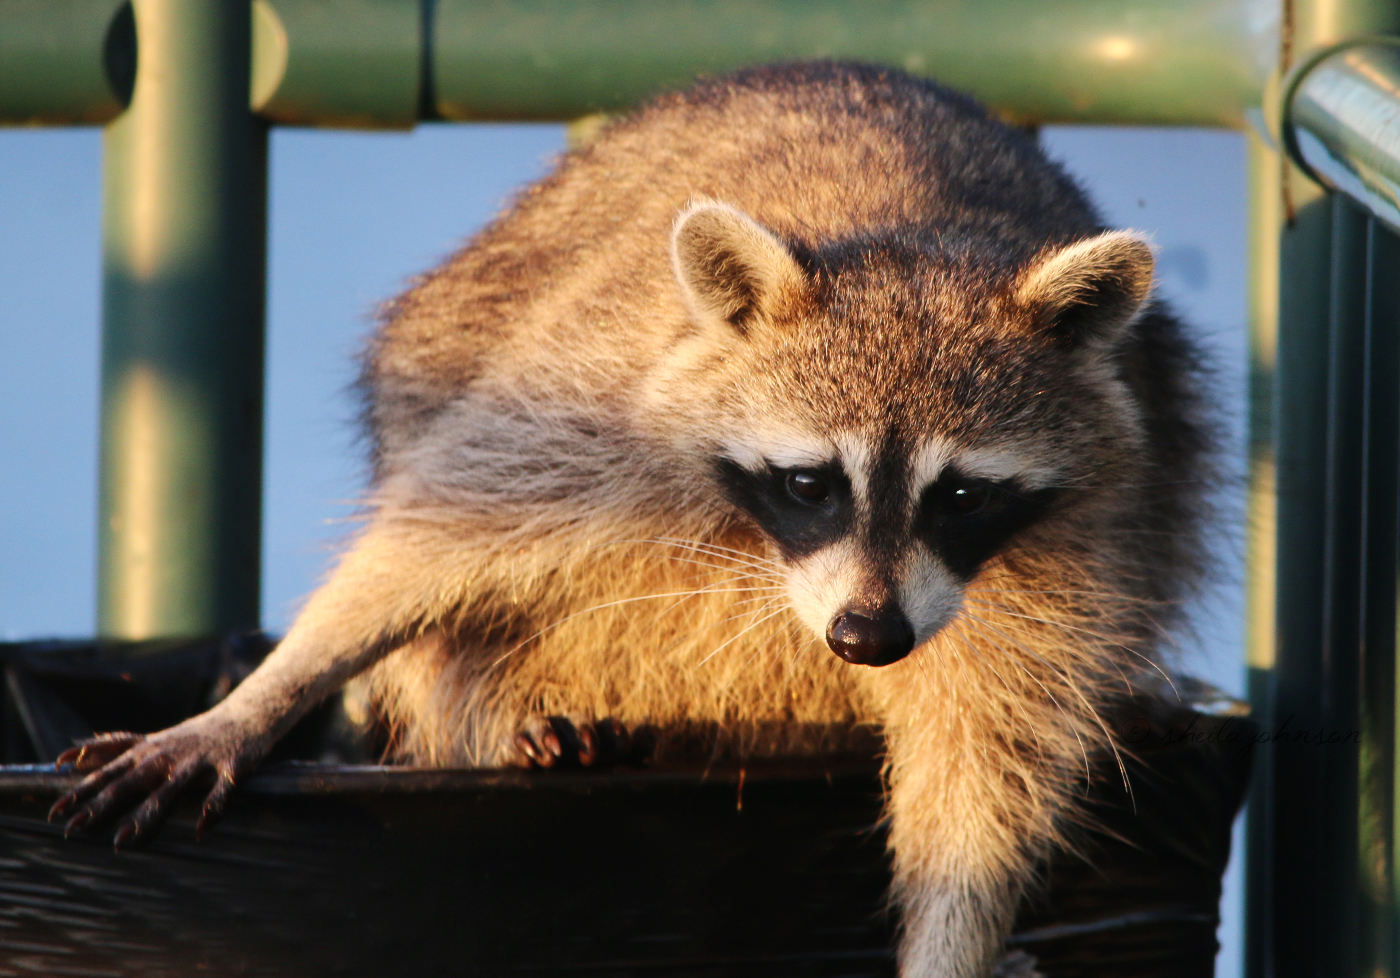 Not 'Committed' As In Psych Ward; 'Committed' As In Doing Whatever It Takes To Get The Job Done. This Florida Raccoon Puts The 'Dive' In 'Dumpster Diving'!